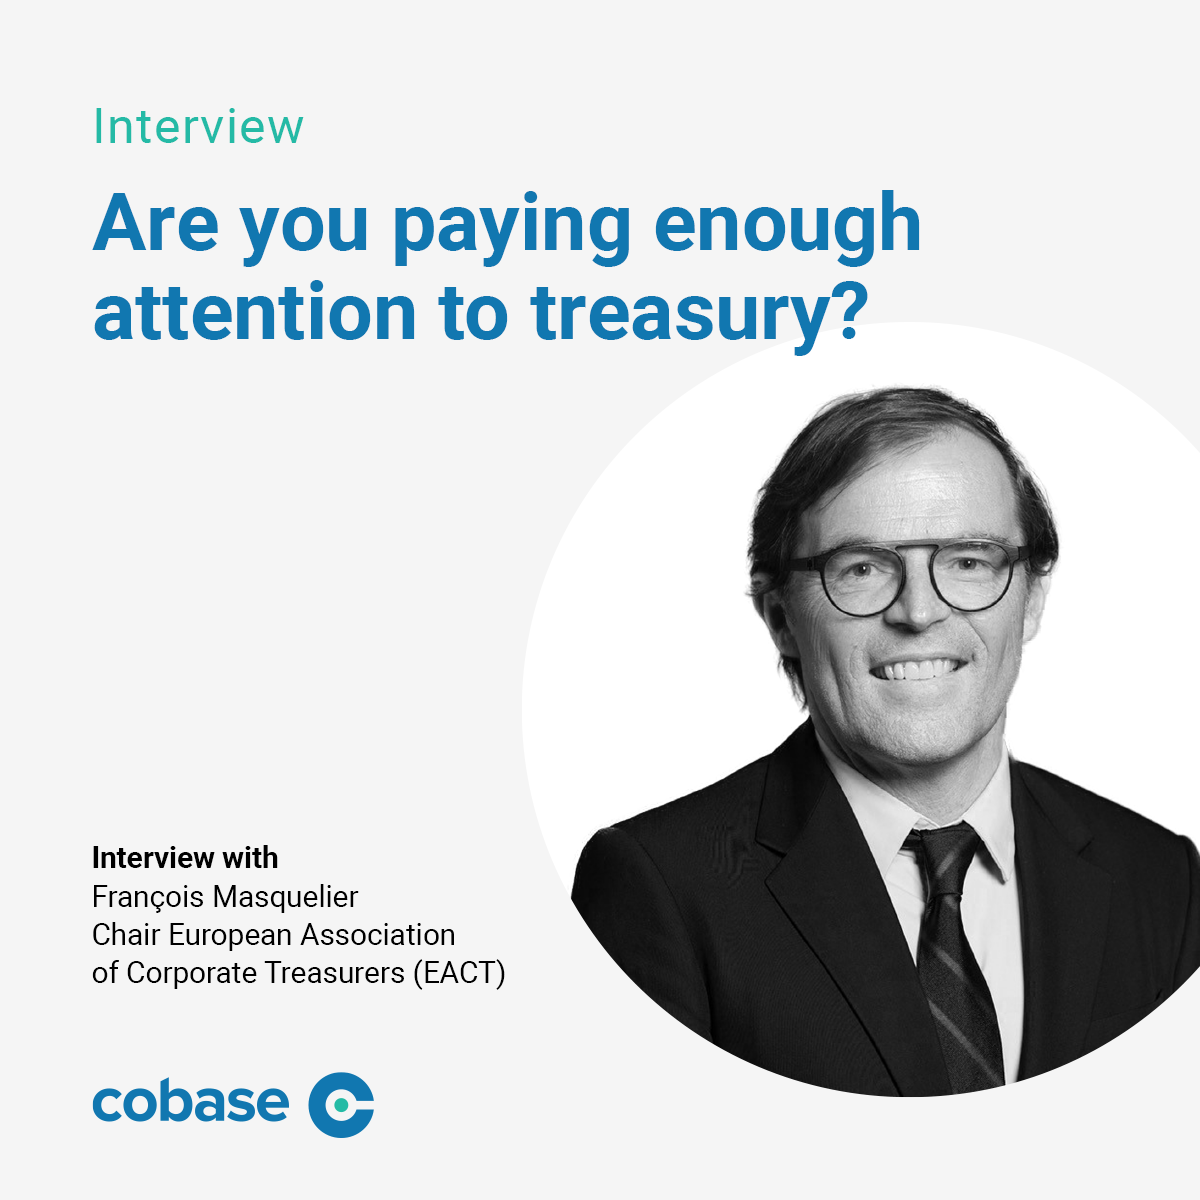 Are you paying enough attention to treasury?